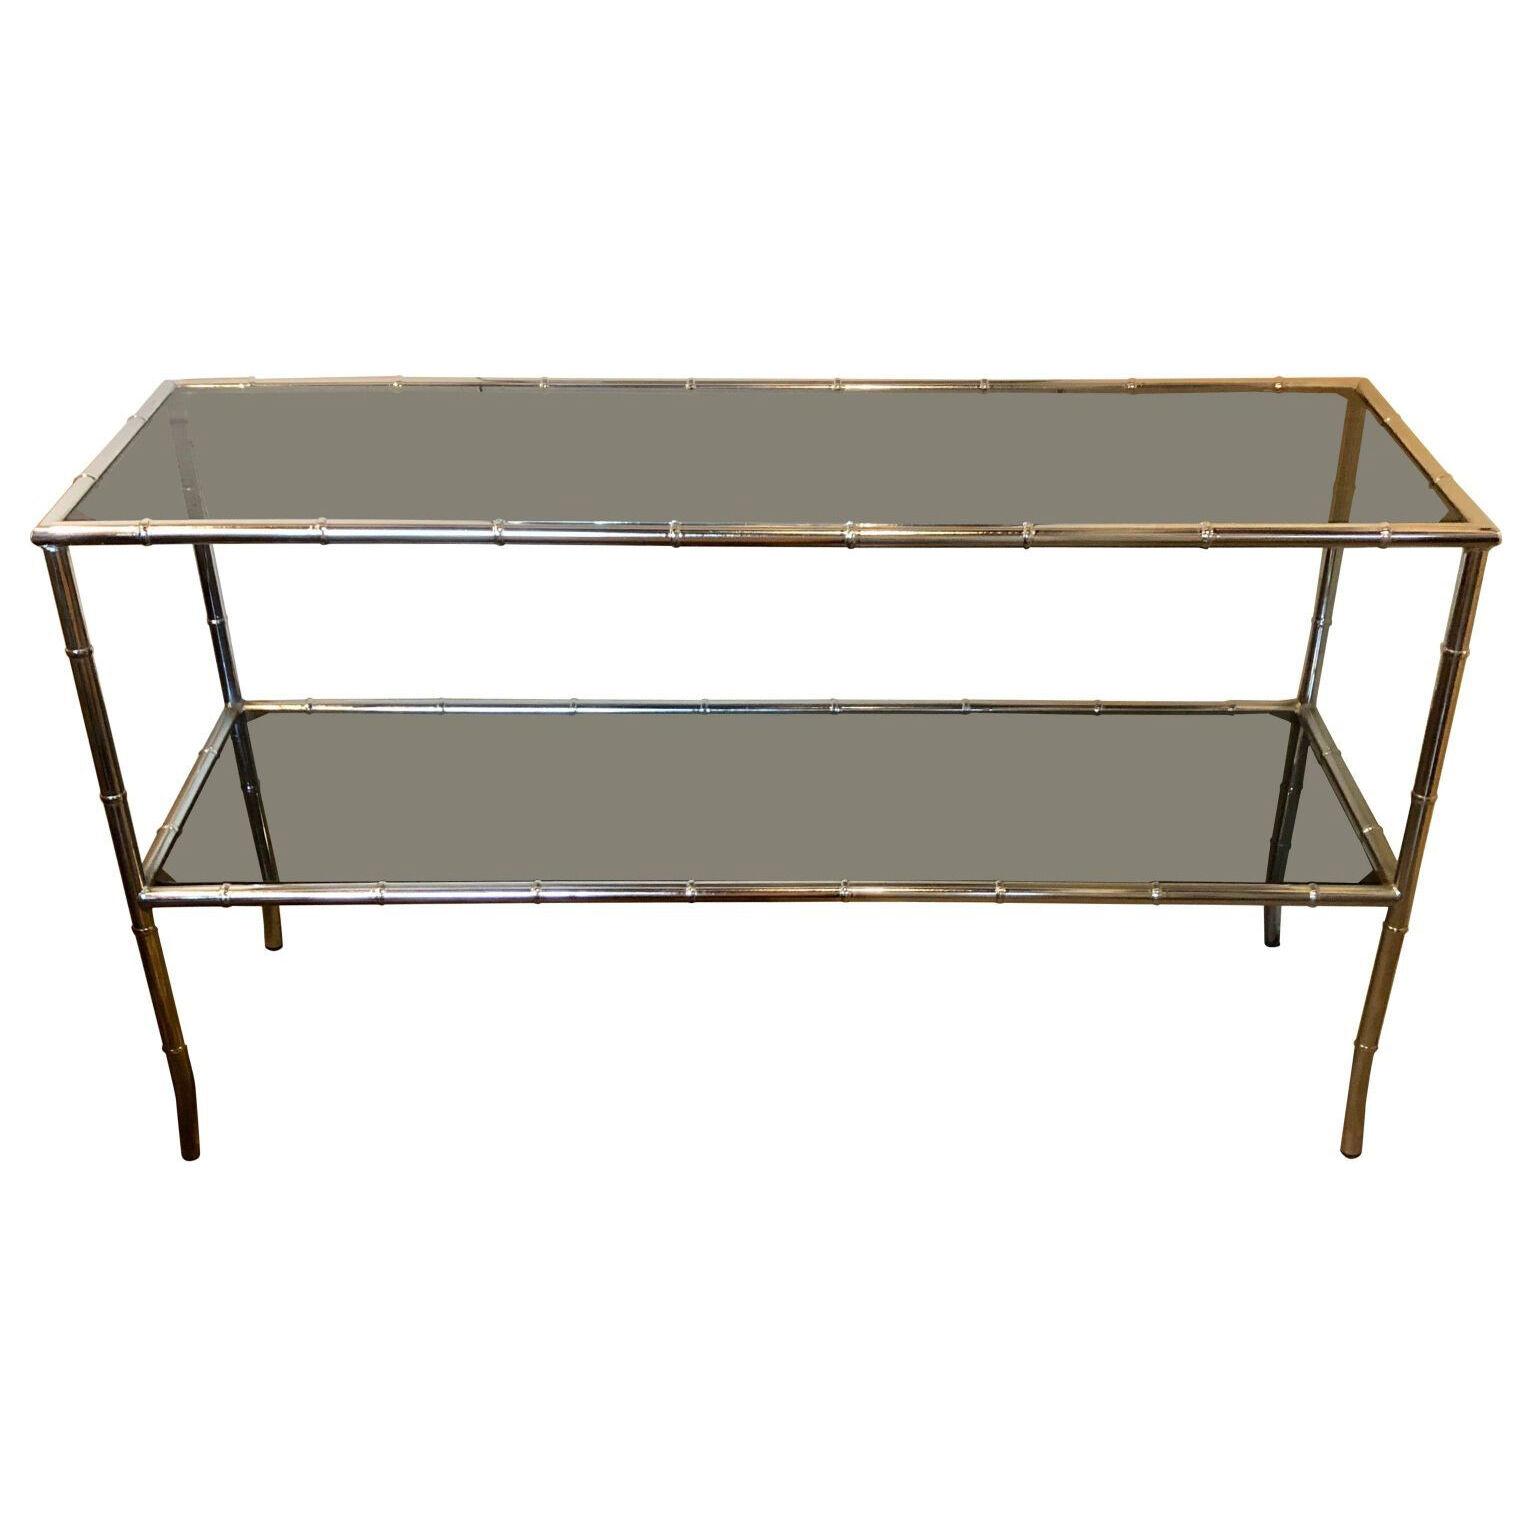 Faux Bamboo Chrome Two-Tier Console Table with Smoke Glass Tops Manner of Jansen